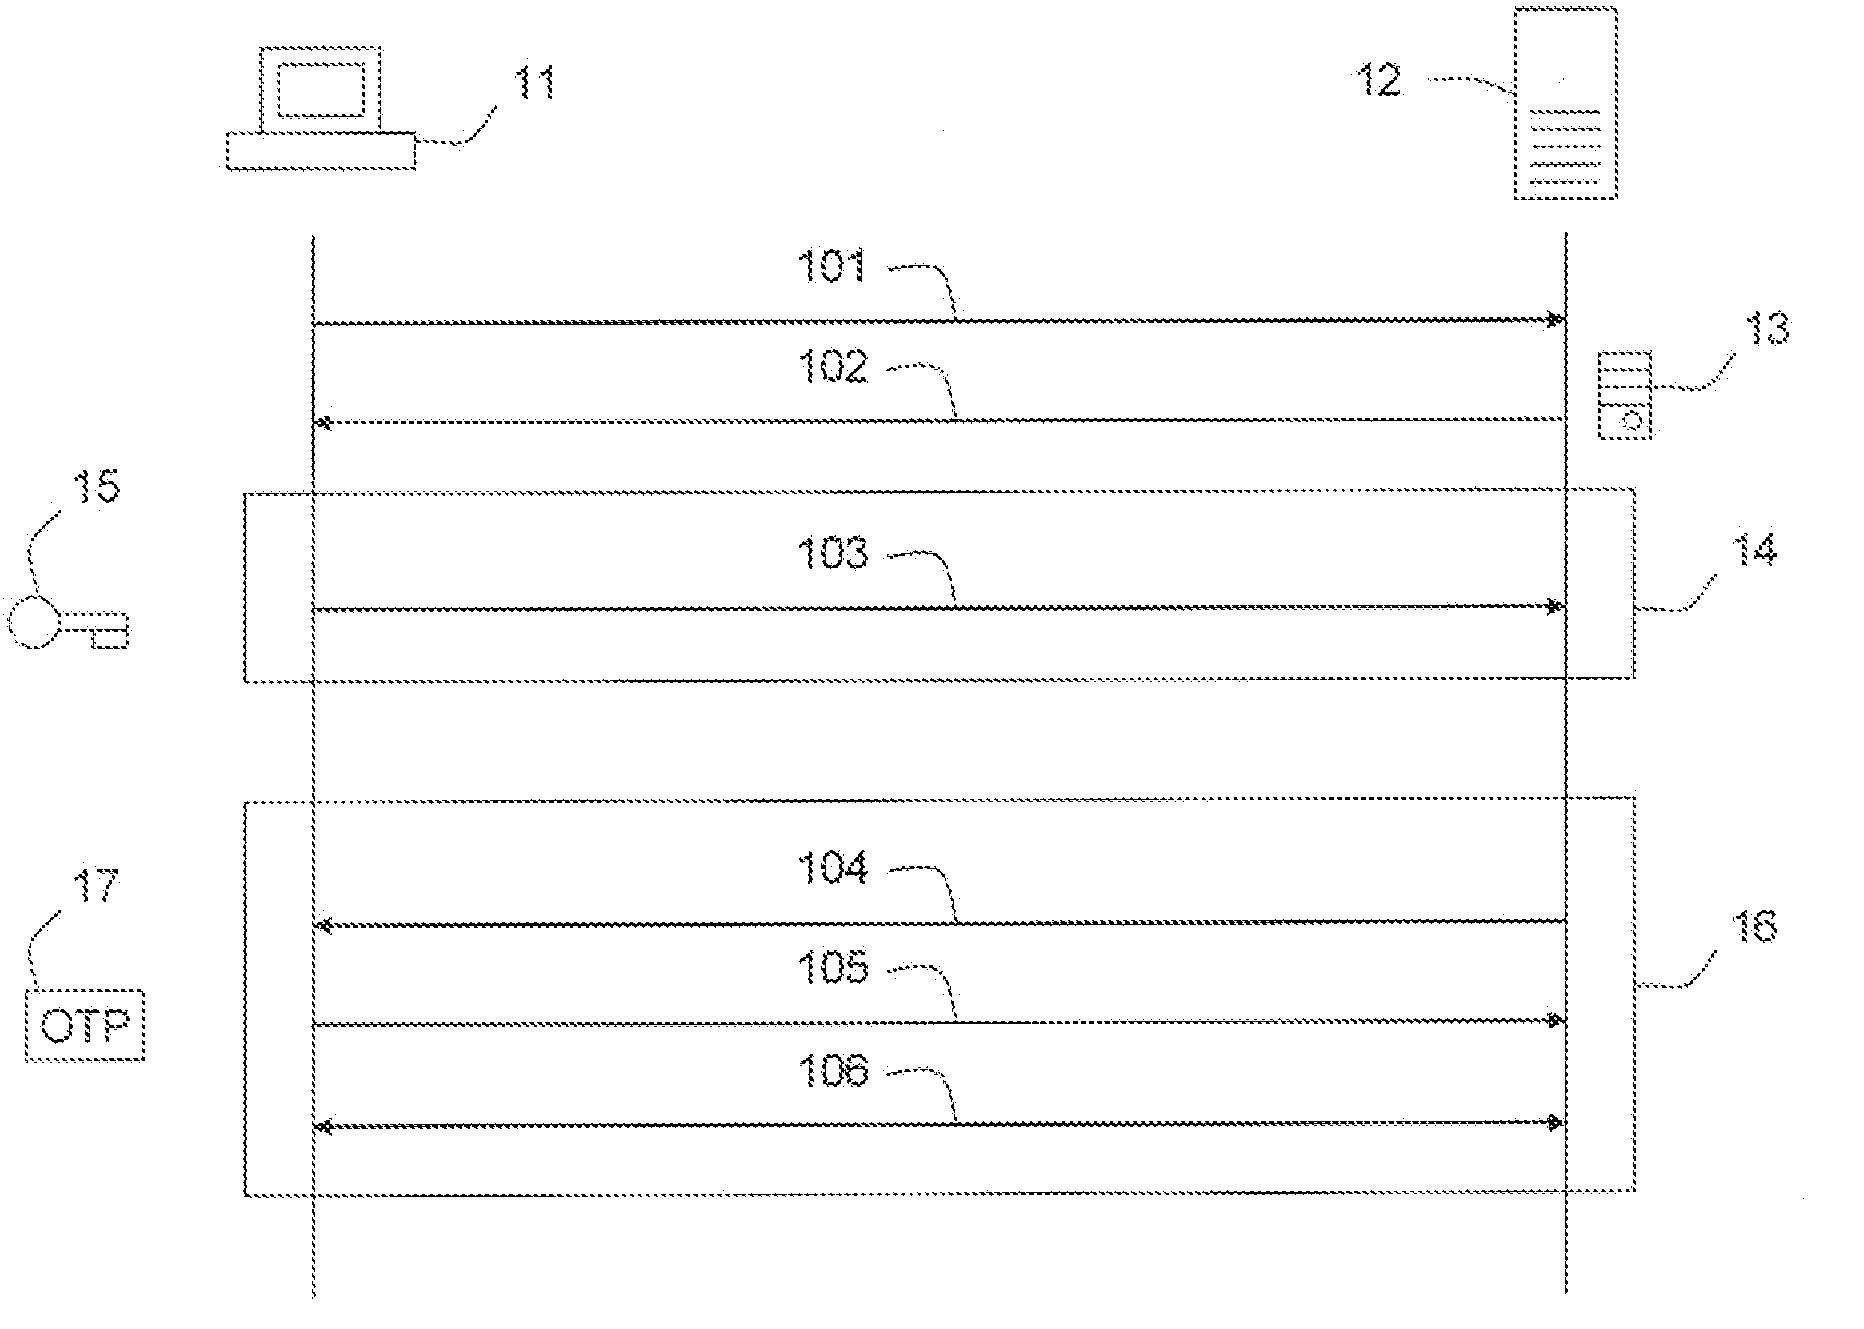 Method for server-side detection of man-in-the-middle attacks